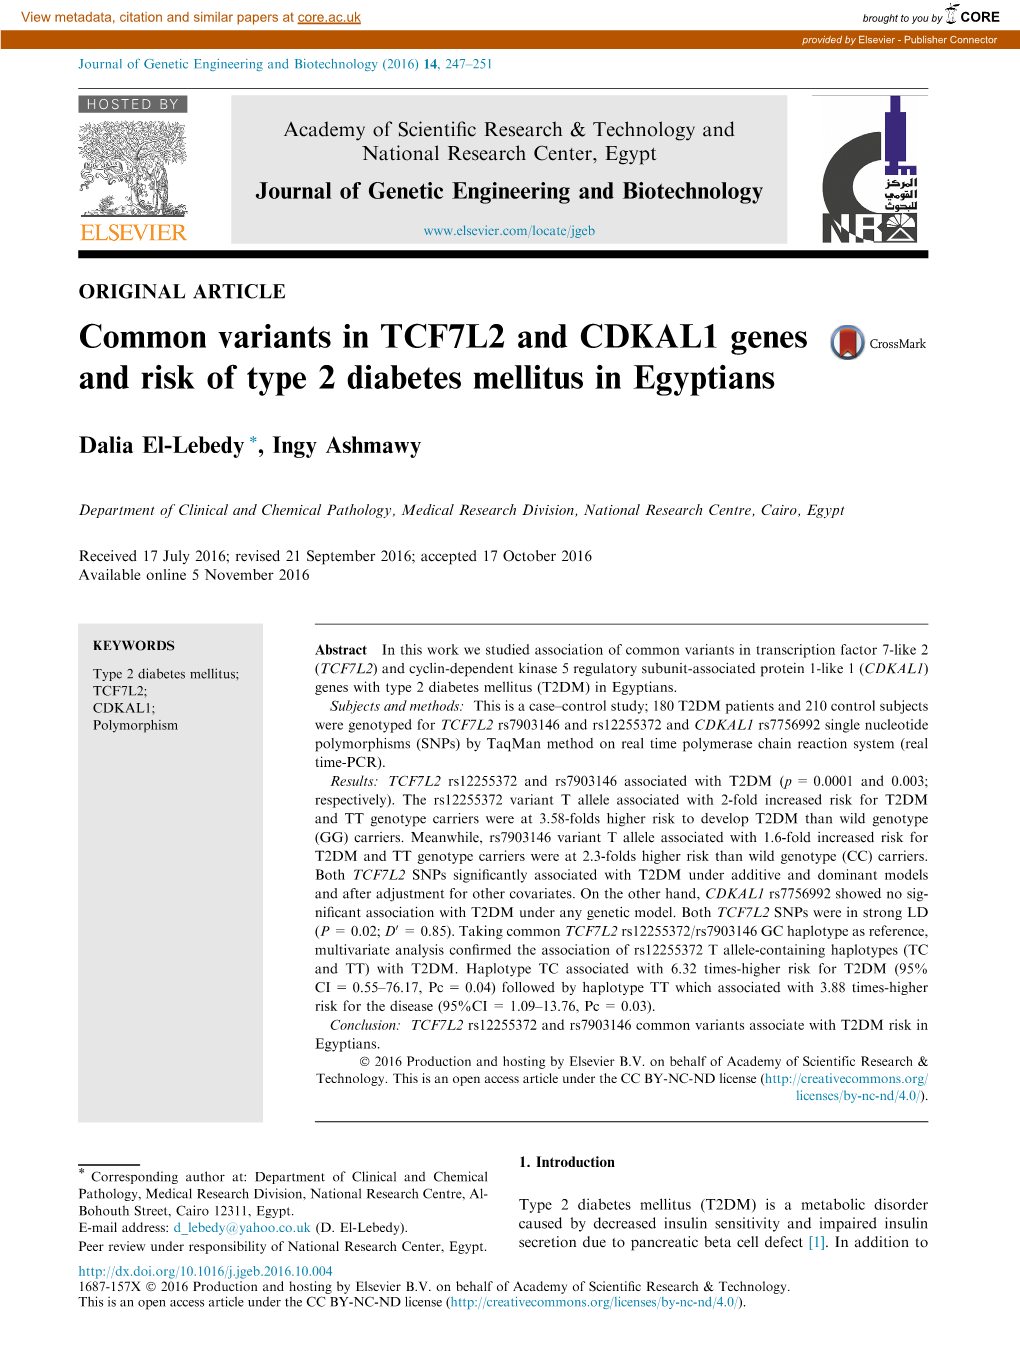 Common Variants in TCF7L2 and CDKAL1 Genes and Risk of Type 2 Diabetes Mellitus in Egyptians